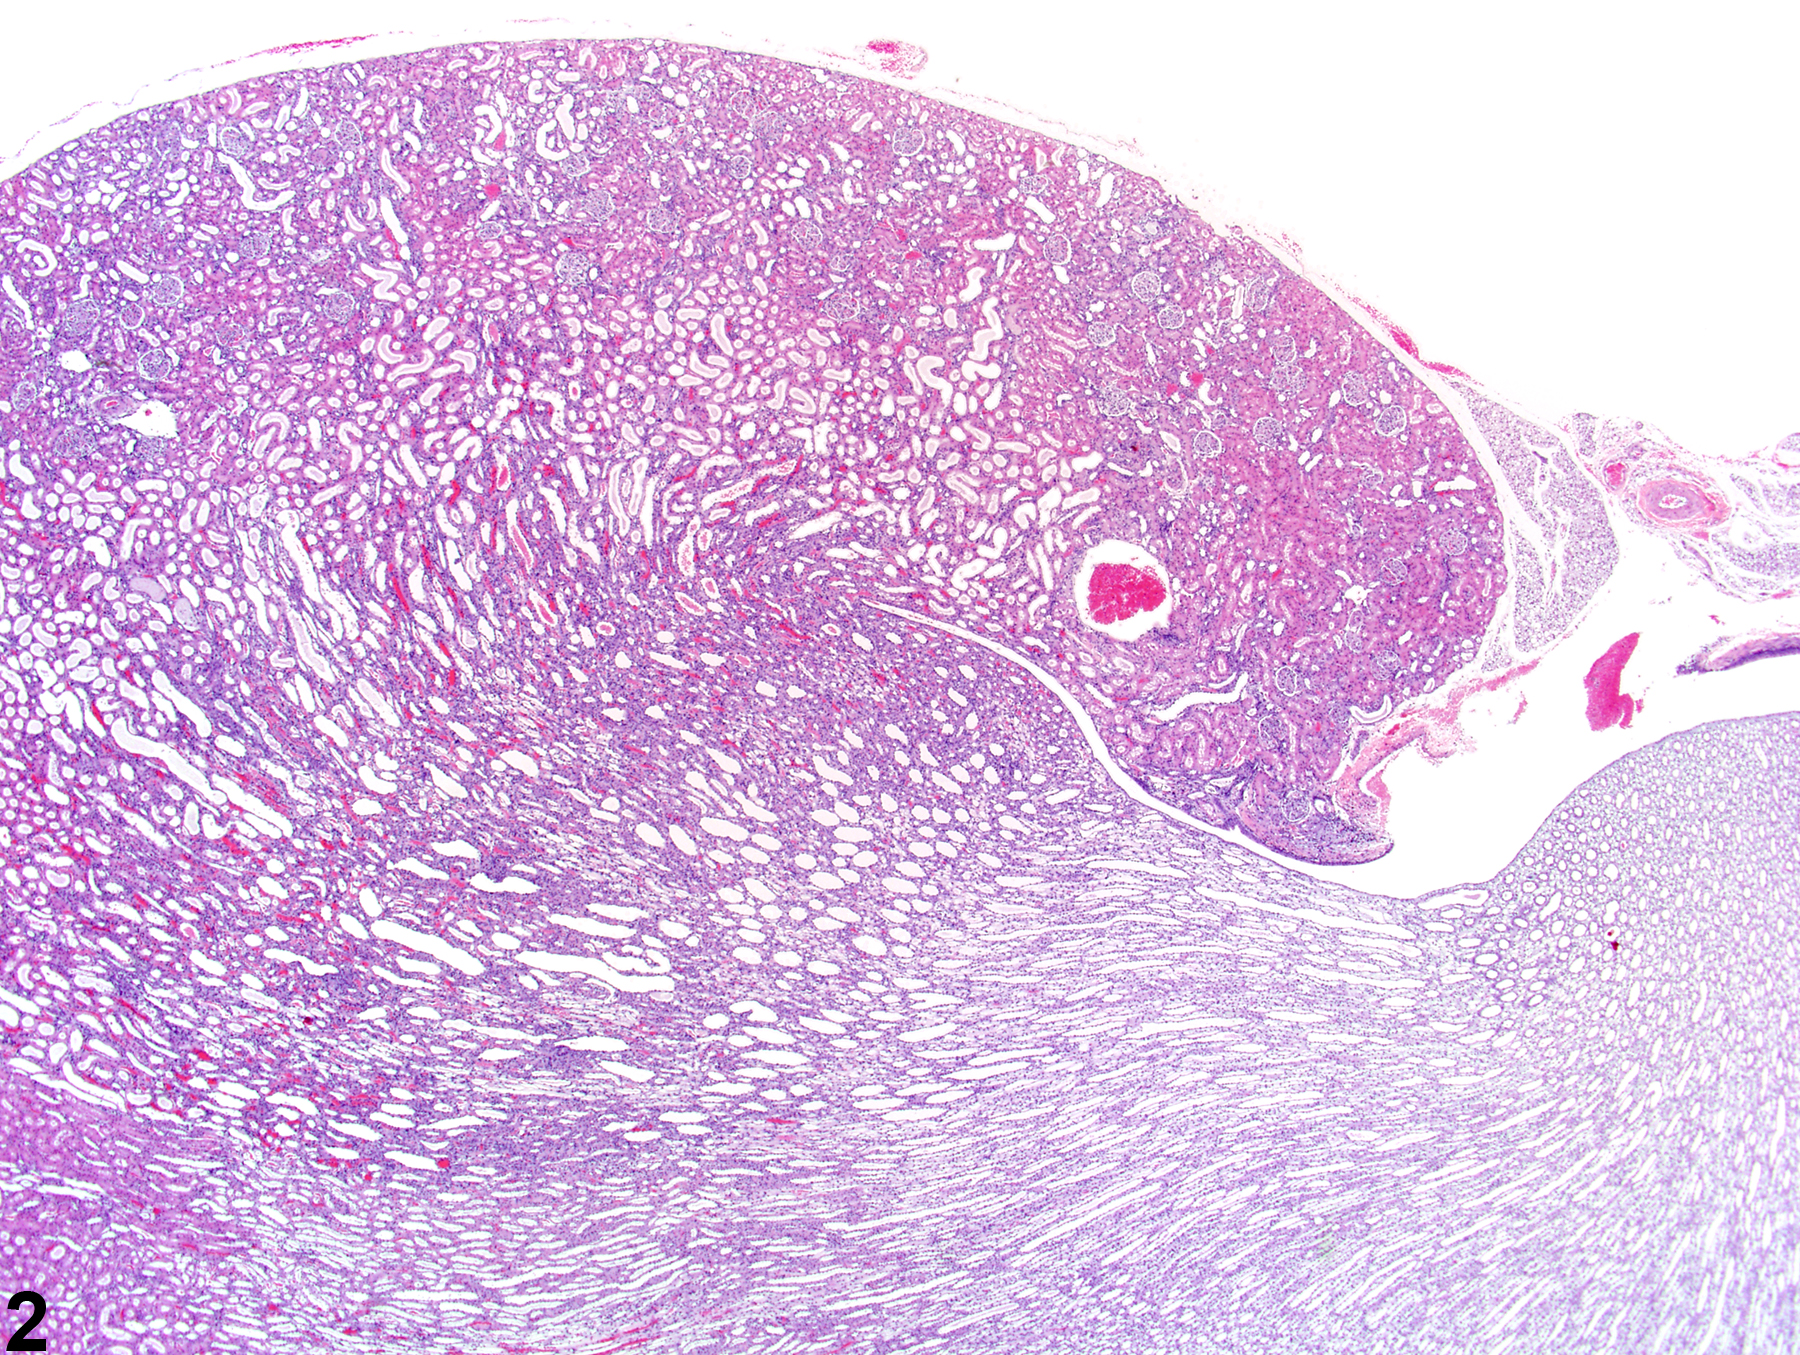 Image of nephropathy, obstructive in the kidney from a female Harlan Sprague-Dawley rat in a subchronic study